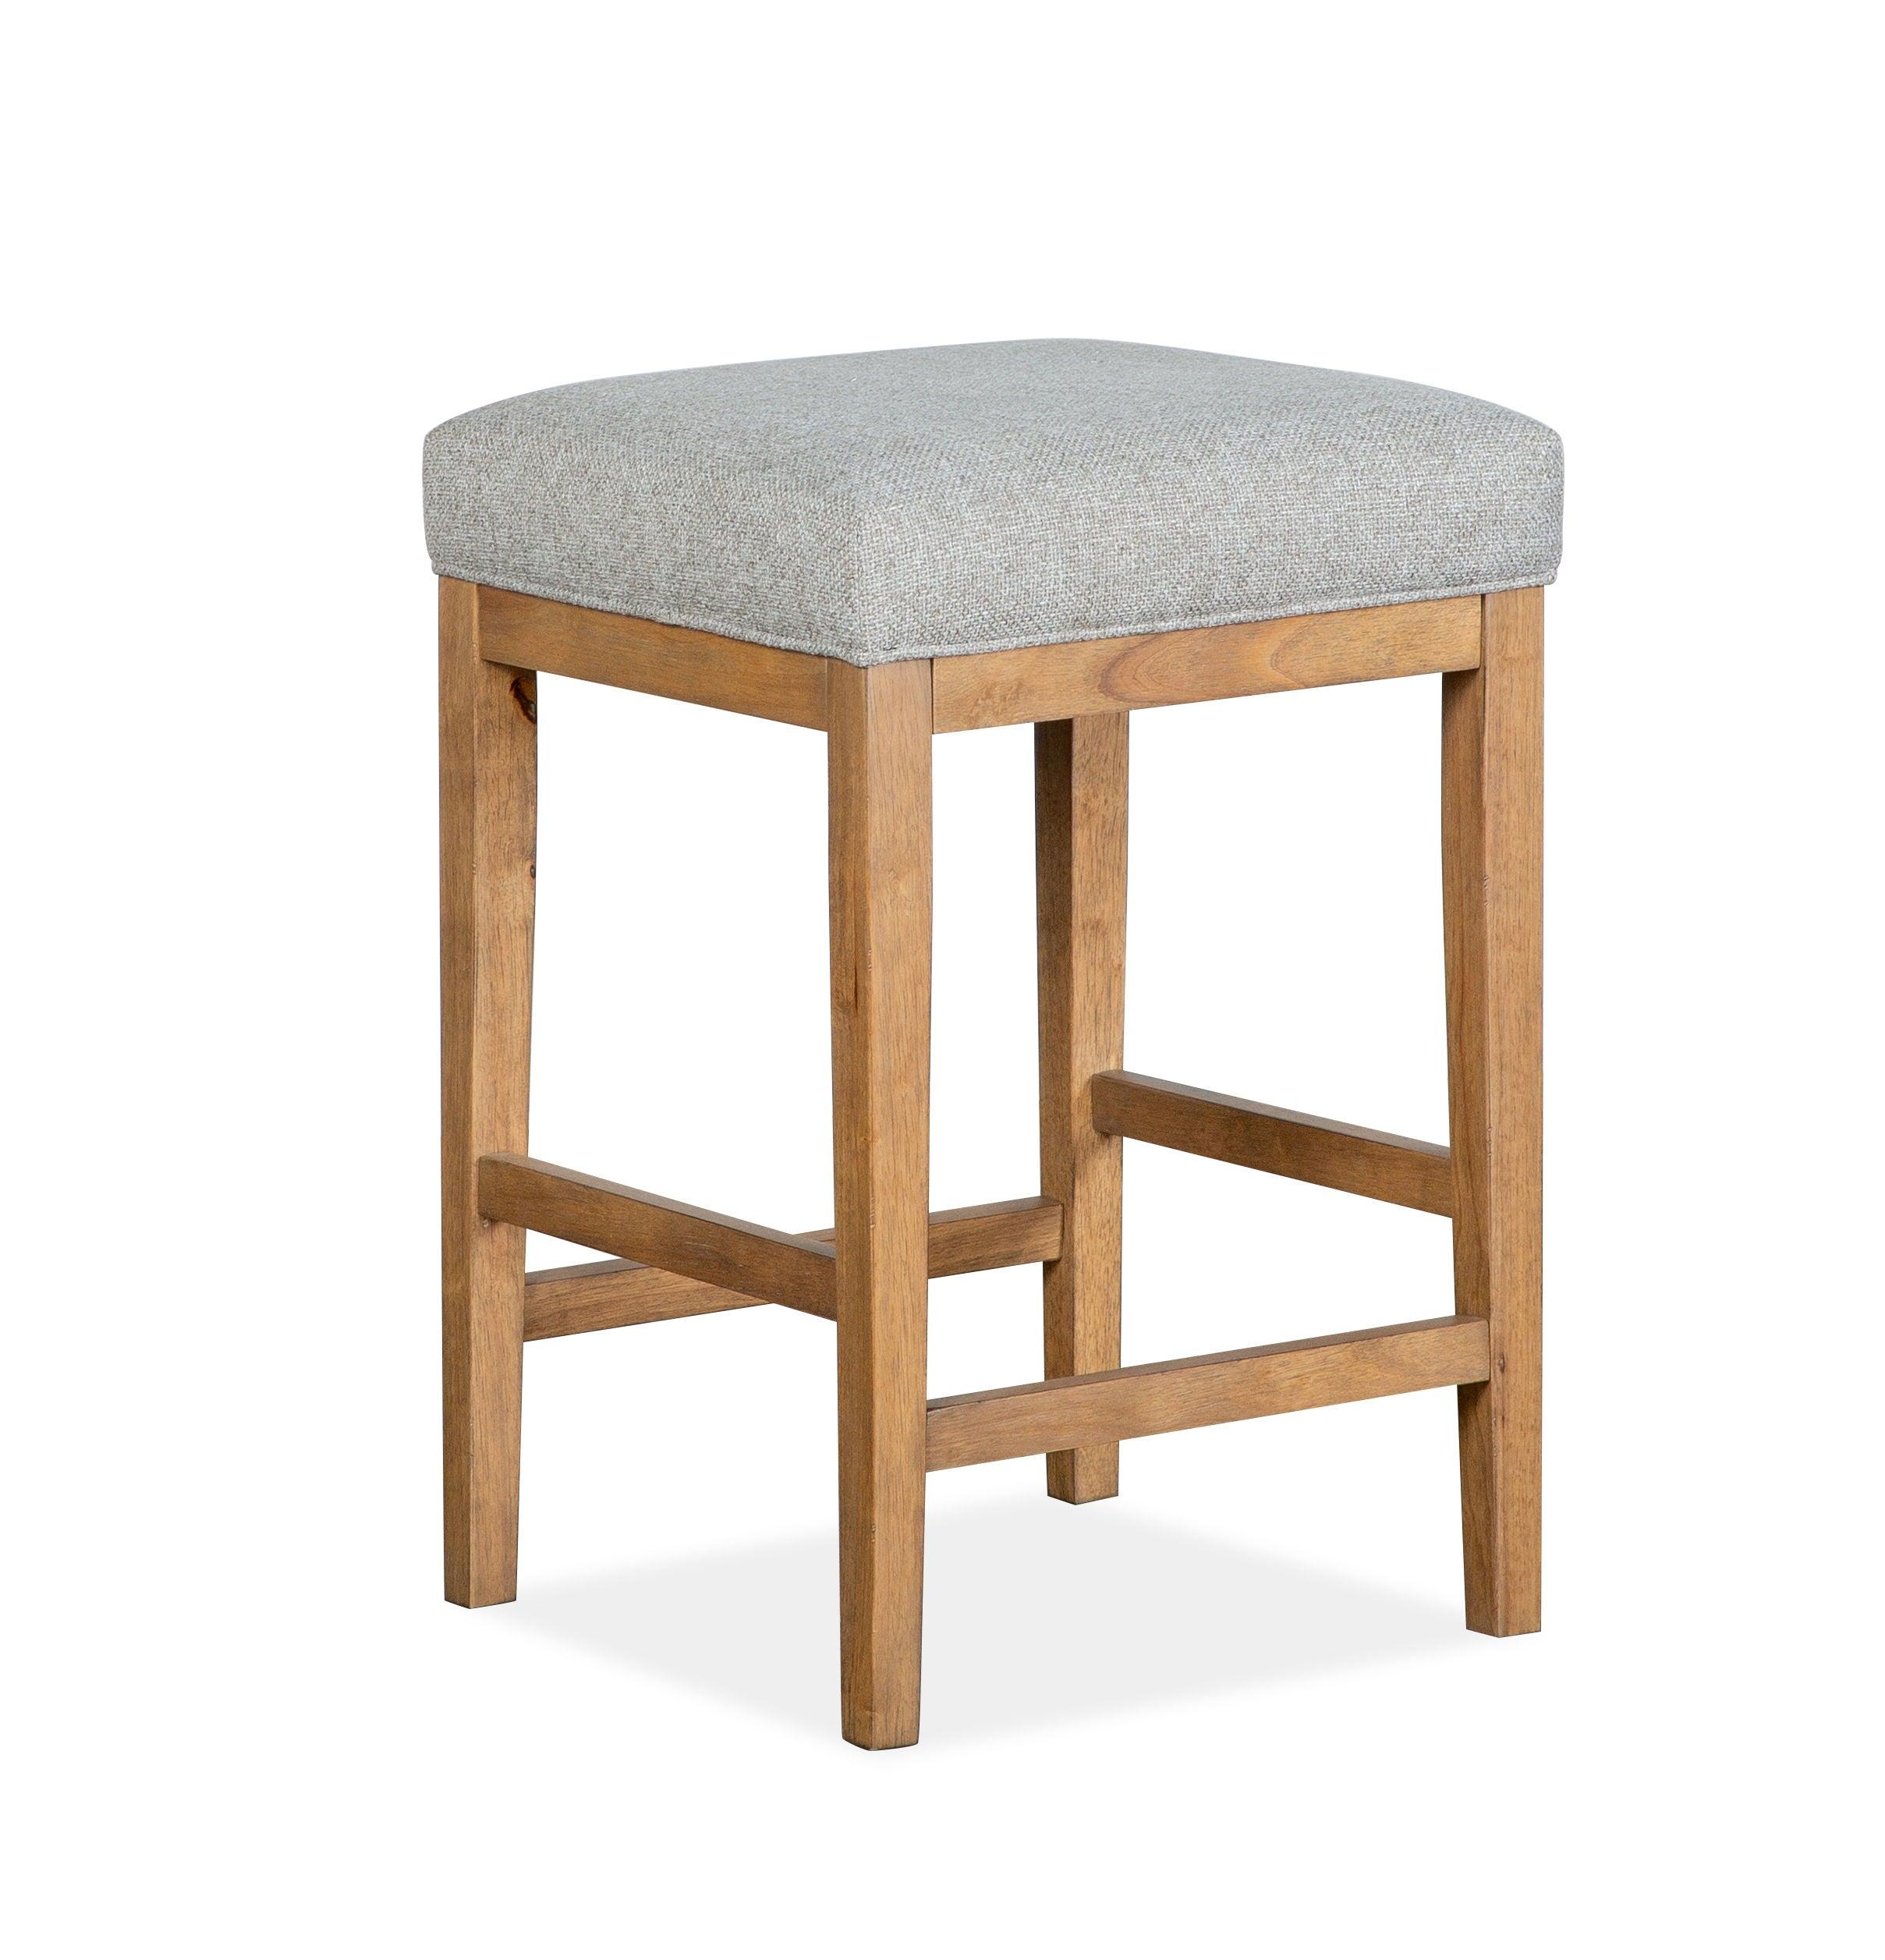 Magnussen Furniture - Lindon - Stool With Grey Upholstered Seat - Belgian Wheat - 5th Avenue Furniture